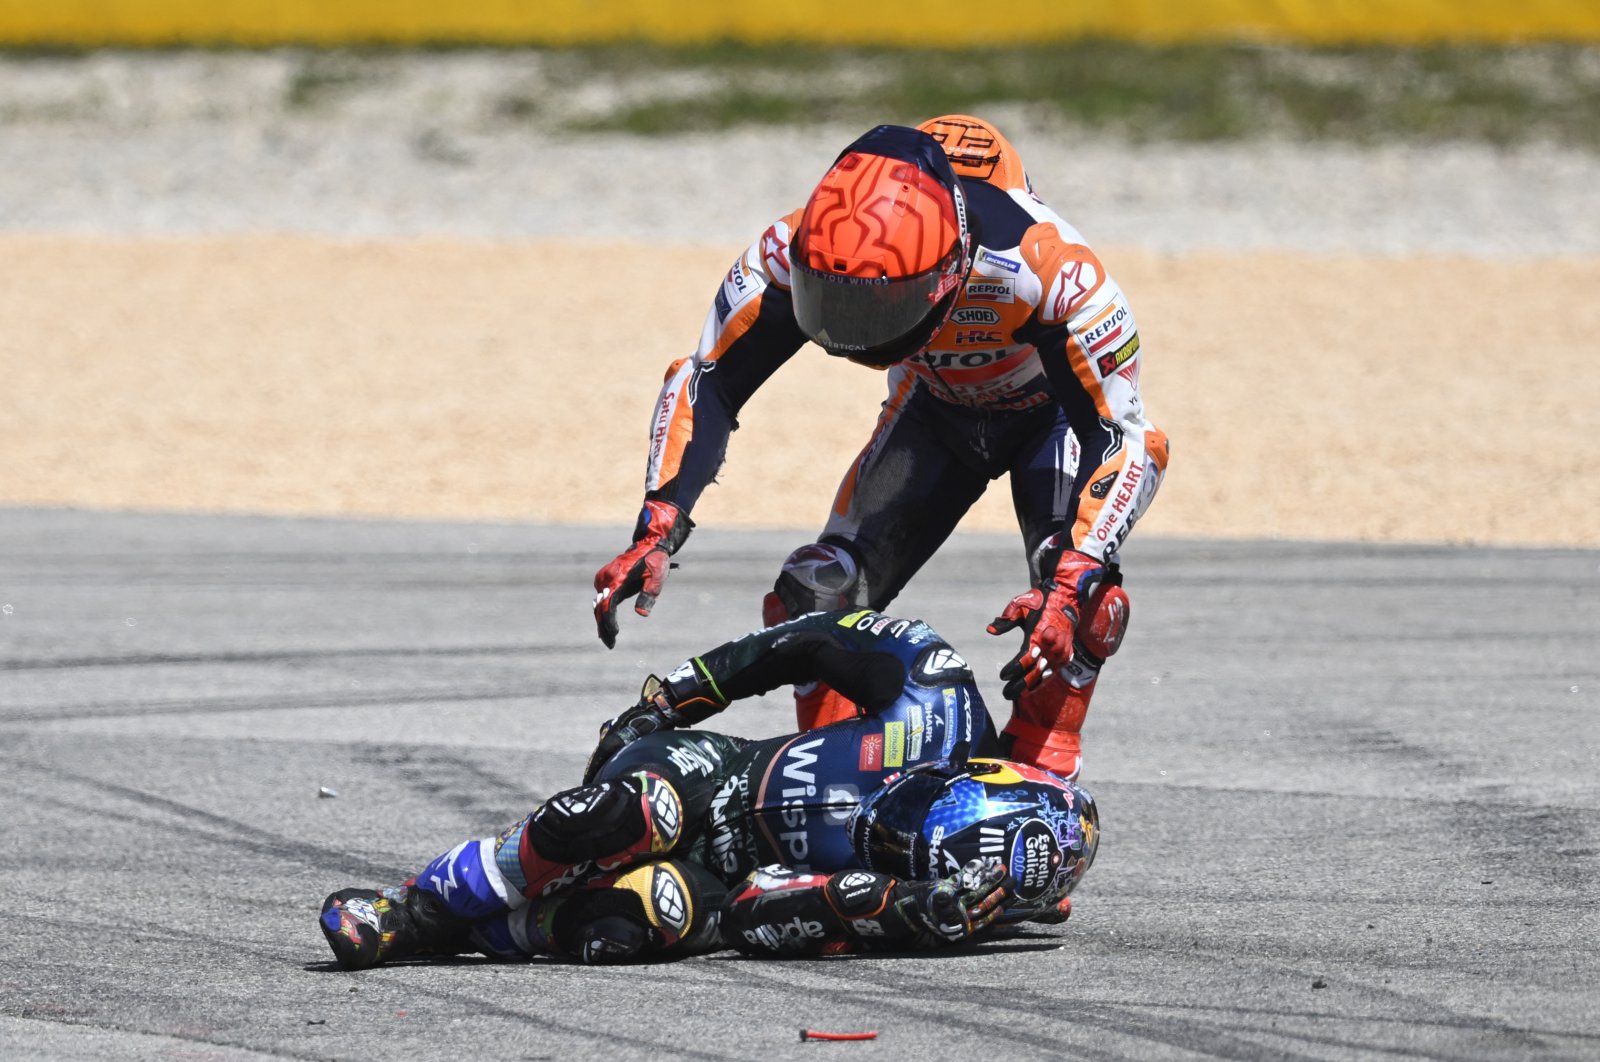 Honda Spanish rider Marc Marquez (R) checks on Aprilia Portuguese rider Miguel Oliveira after crashing during the MotoGP race of the Portuguese Grand Prix at the Algarve International Circuit, Portimao, Portugal, March 26, 2023. (AFP Photo)